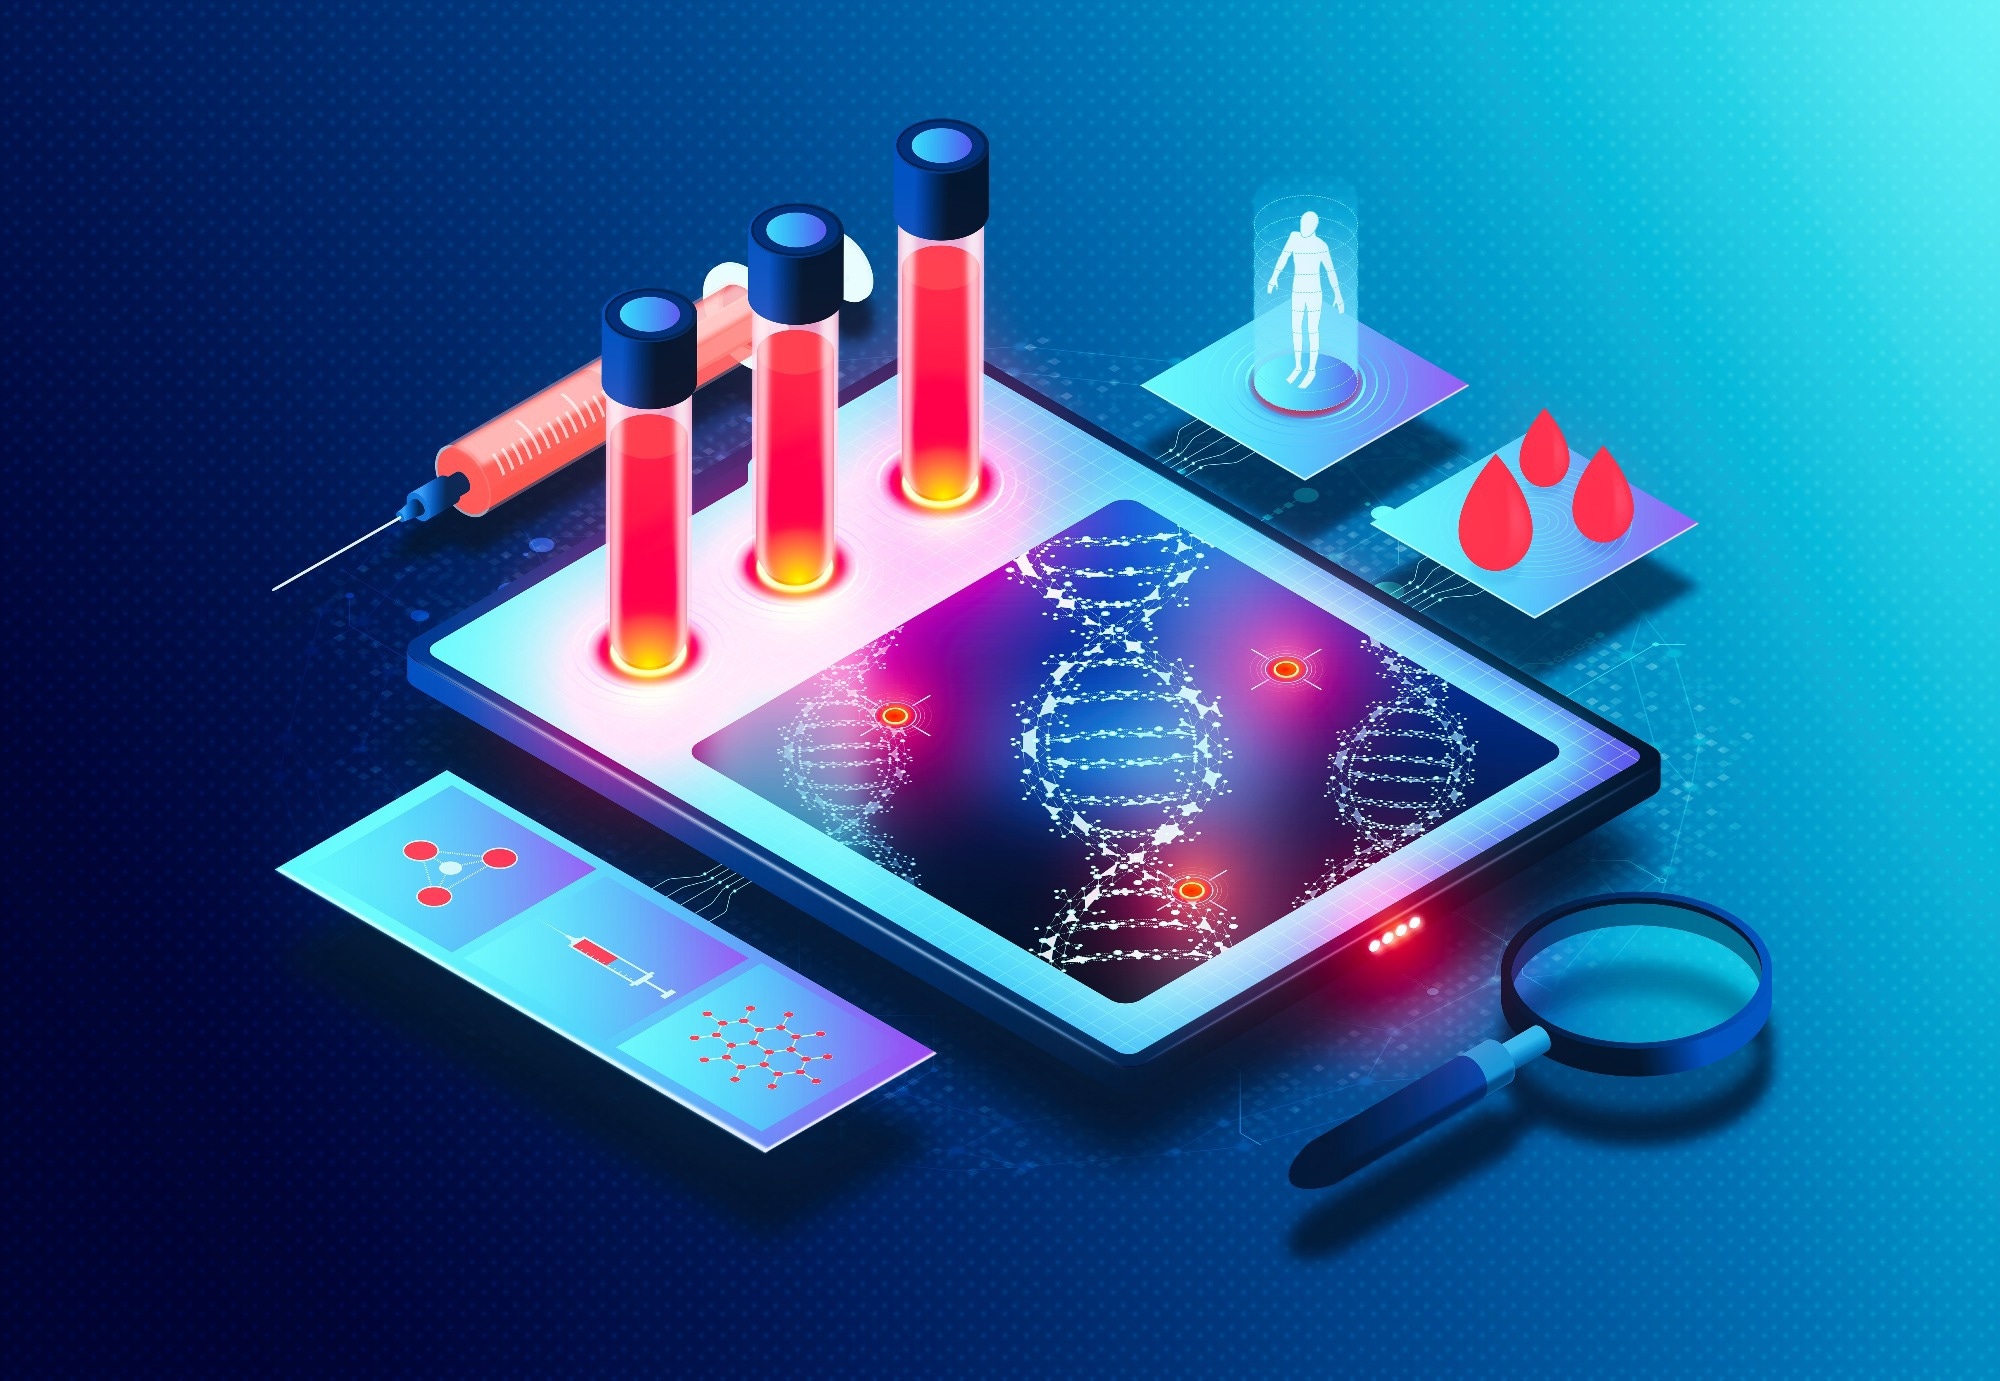 Study: Novel proteomics-based plasma test for early detection of multiple cancers in the general population. Image Credit: ArtemisDiana/Shutterstock.com